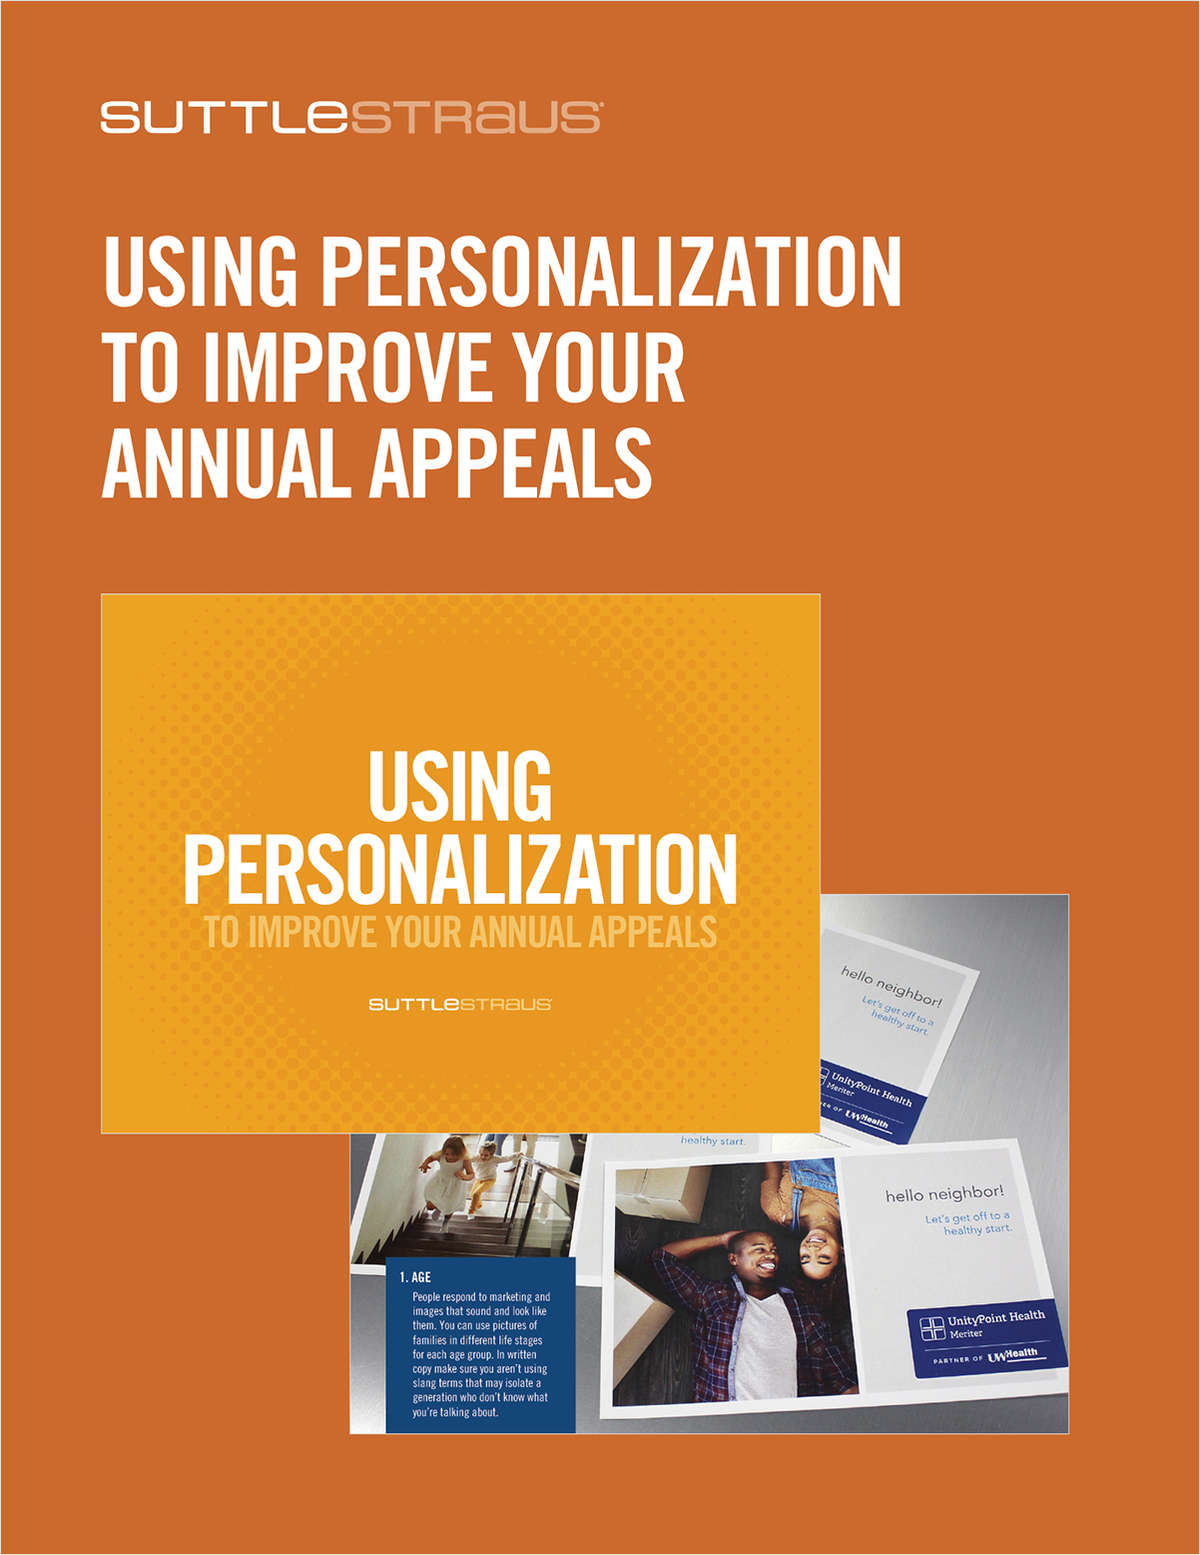 Using Personalization to Improve Your Annual Appeals